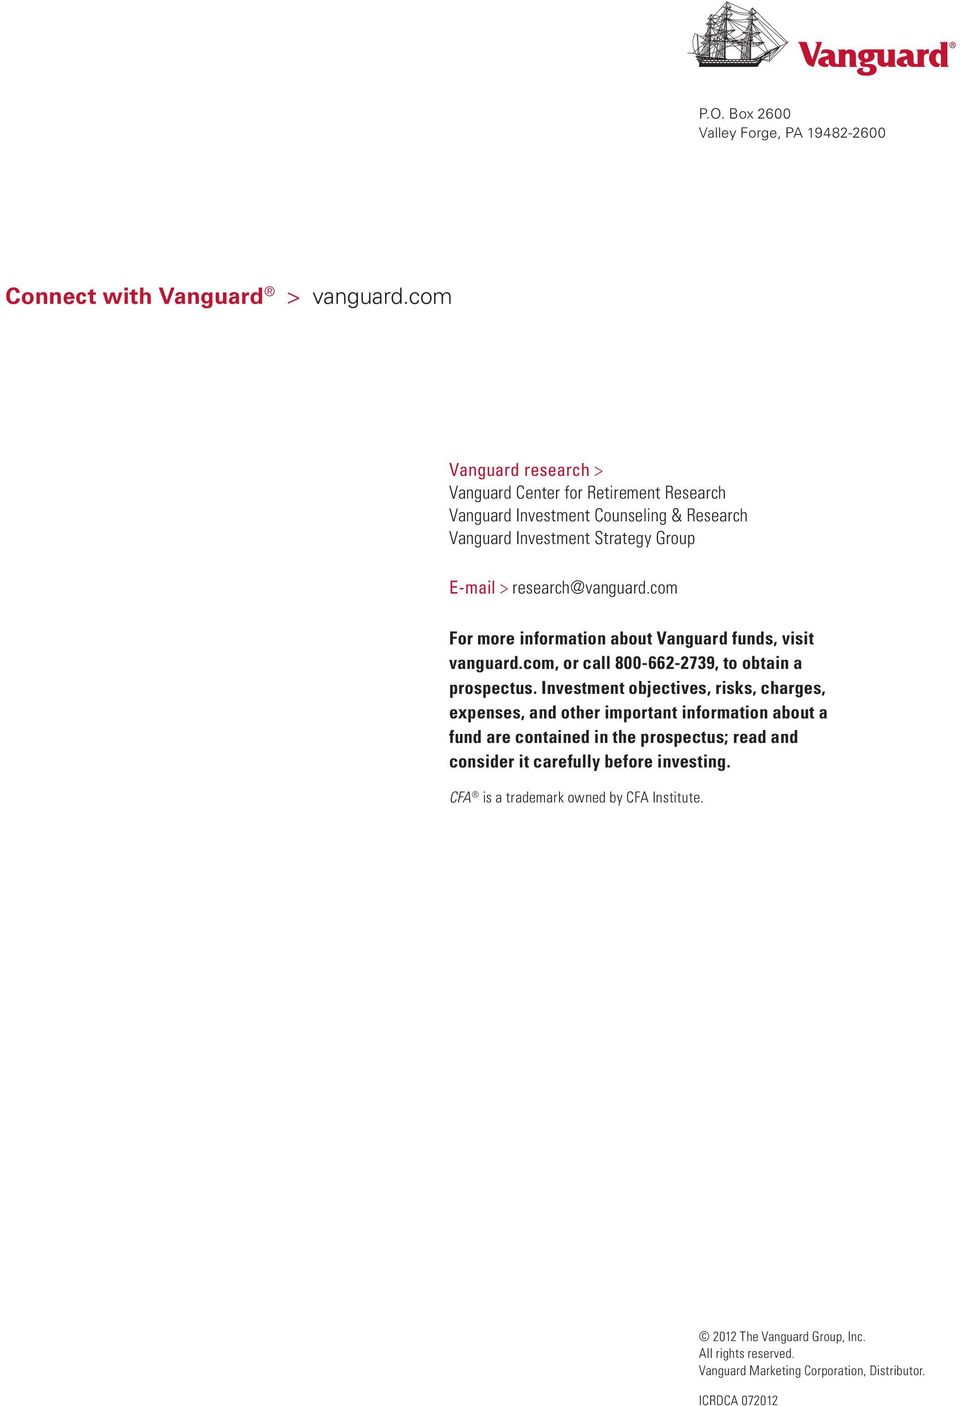 com For more information about Vanguard funds, visit vanguard.com, or call 800-662-2739, to obtain a prospectus.